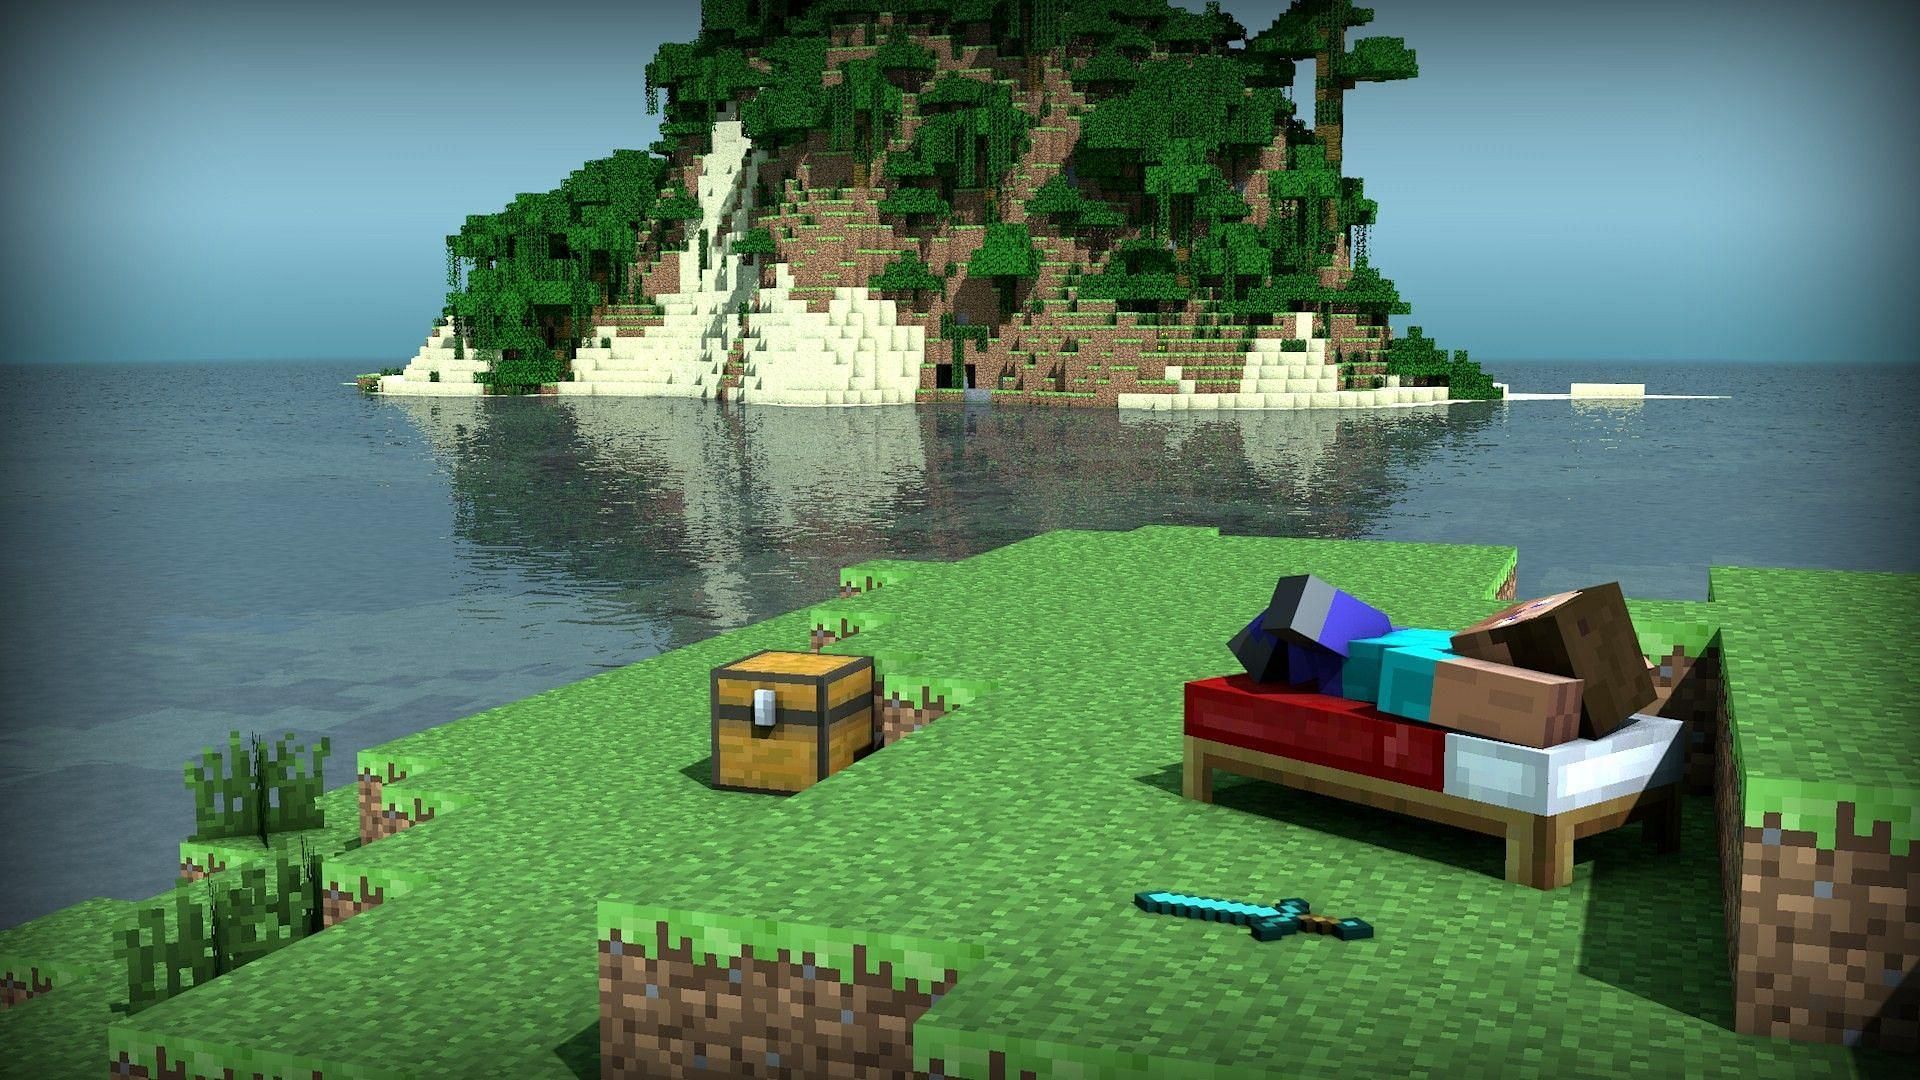 Minecraft survival mods can help spice up regular gameplay (Image via Wallpaperaccess)